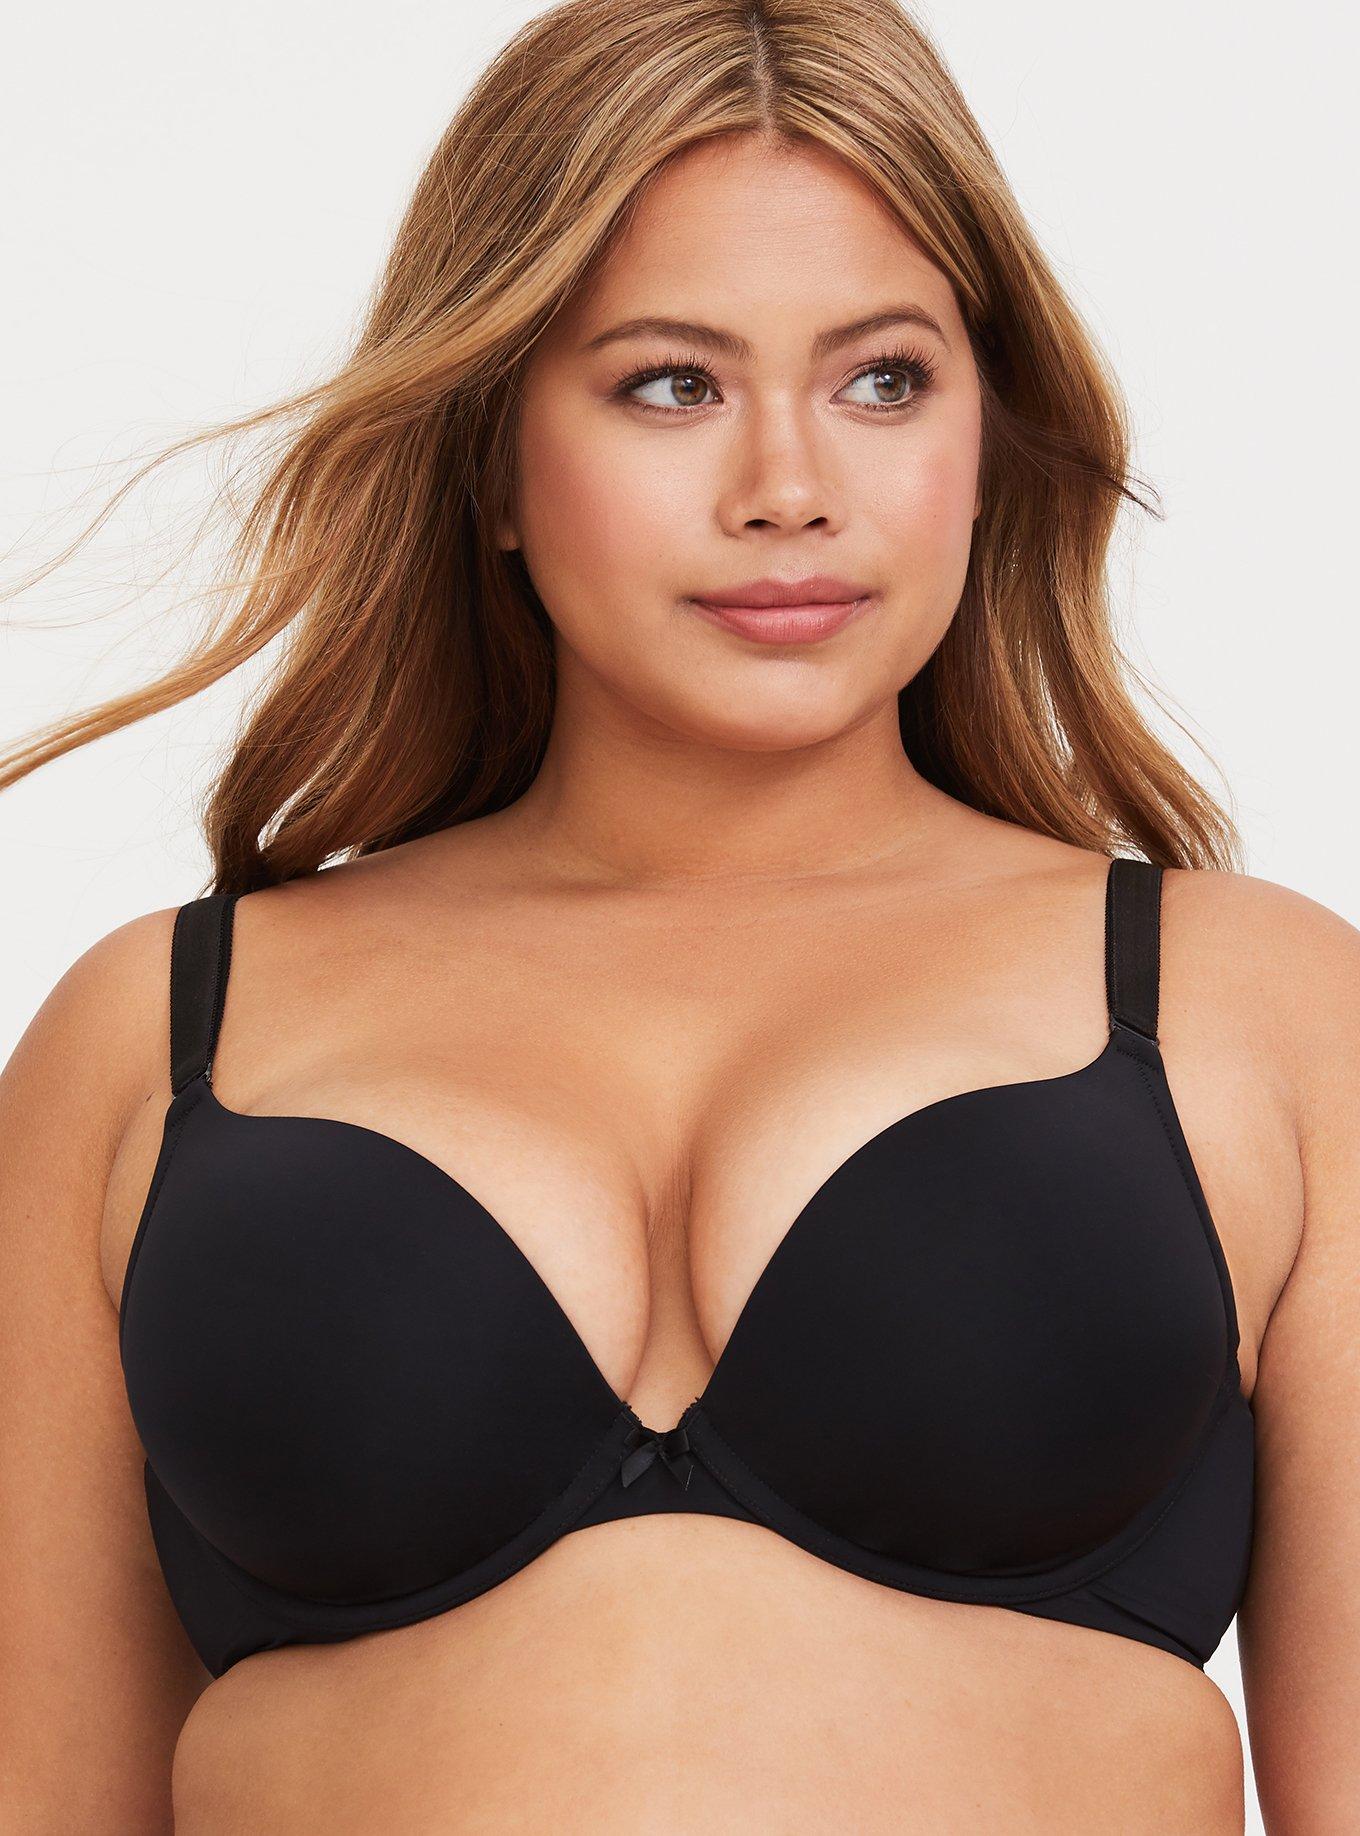 The New You Bra Boutique bras with the perfect fit Gadsden, AL